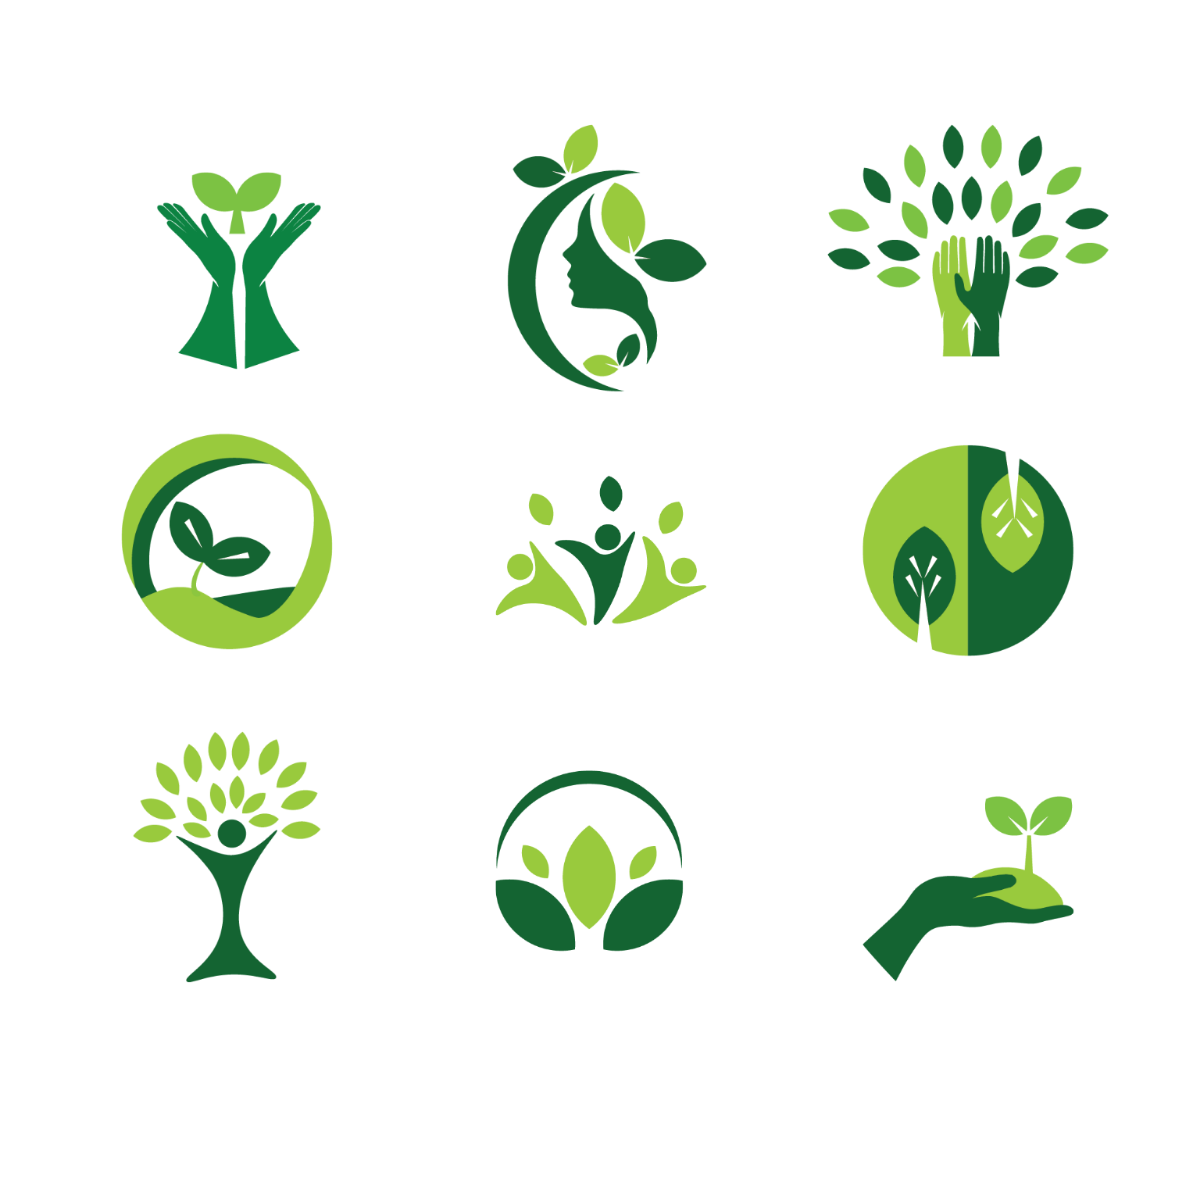 Nature Symbol Template - Edit Online & Download Example | Template.net